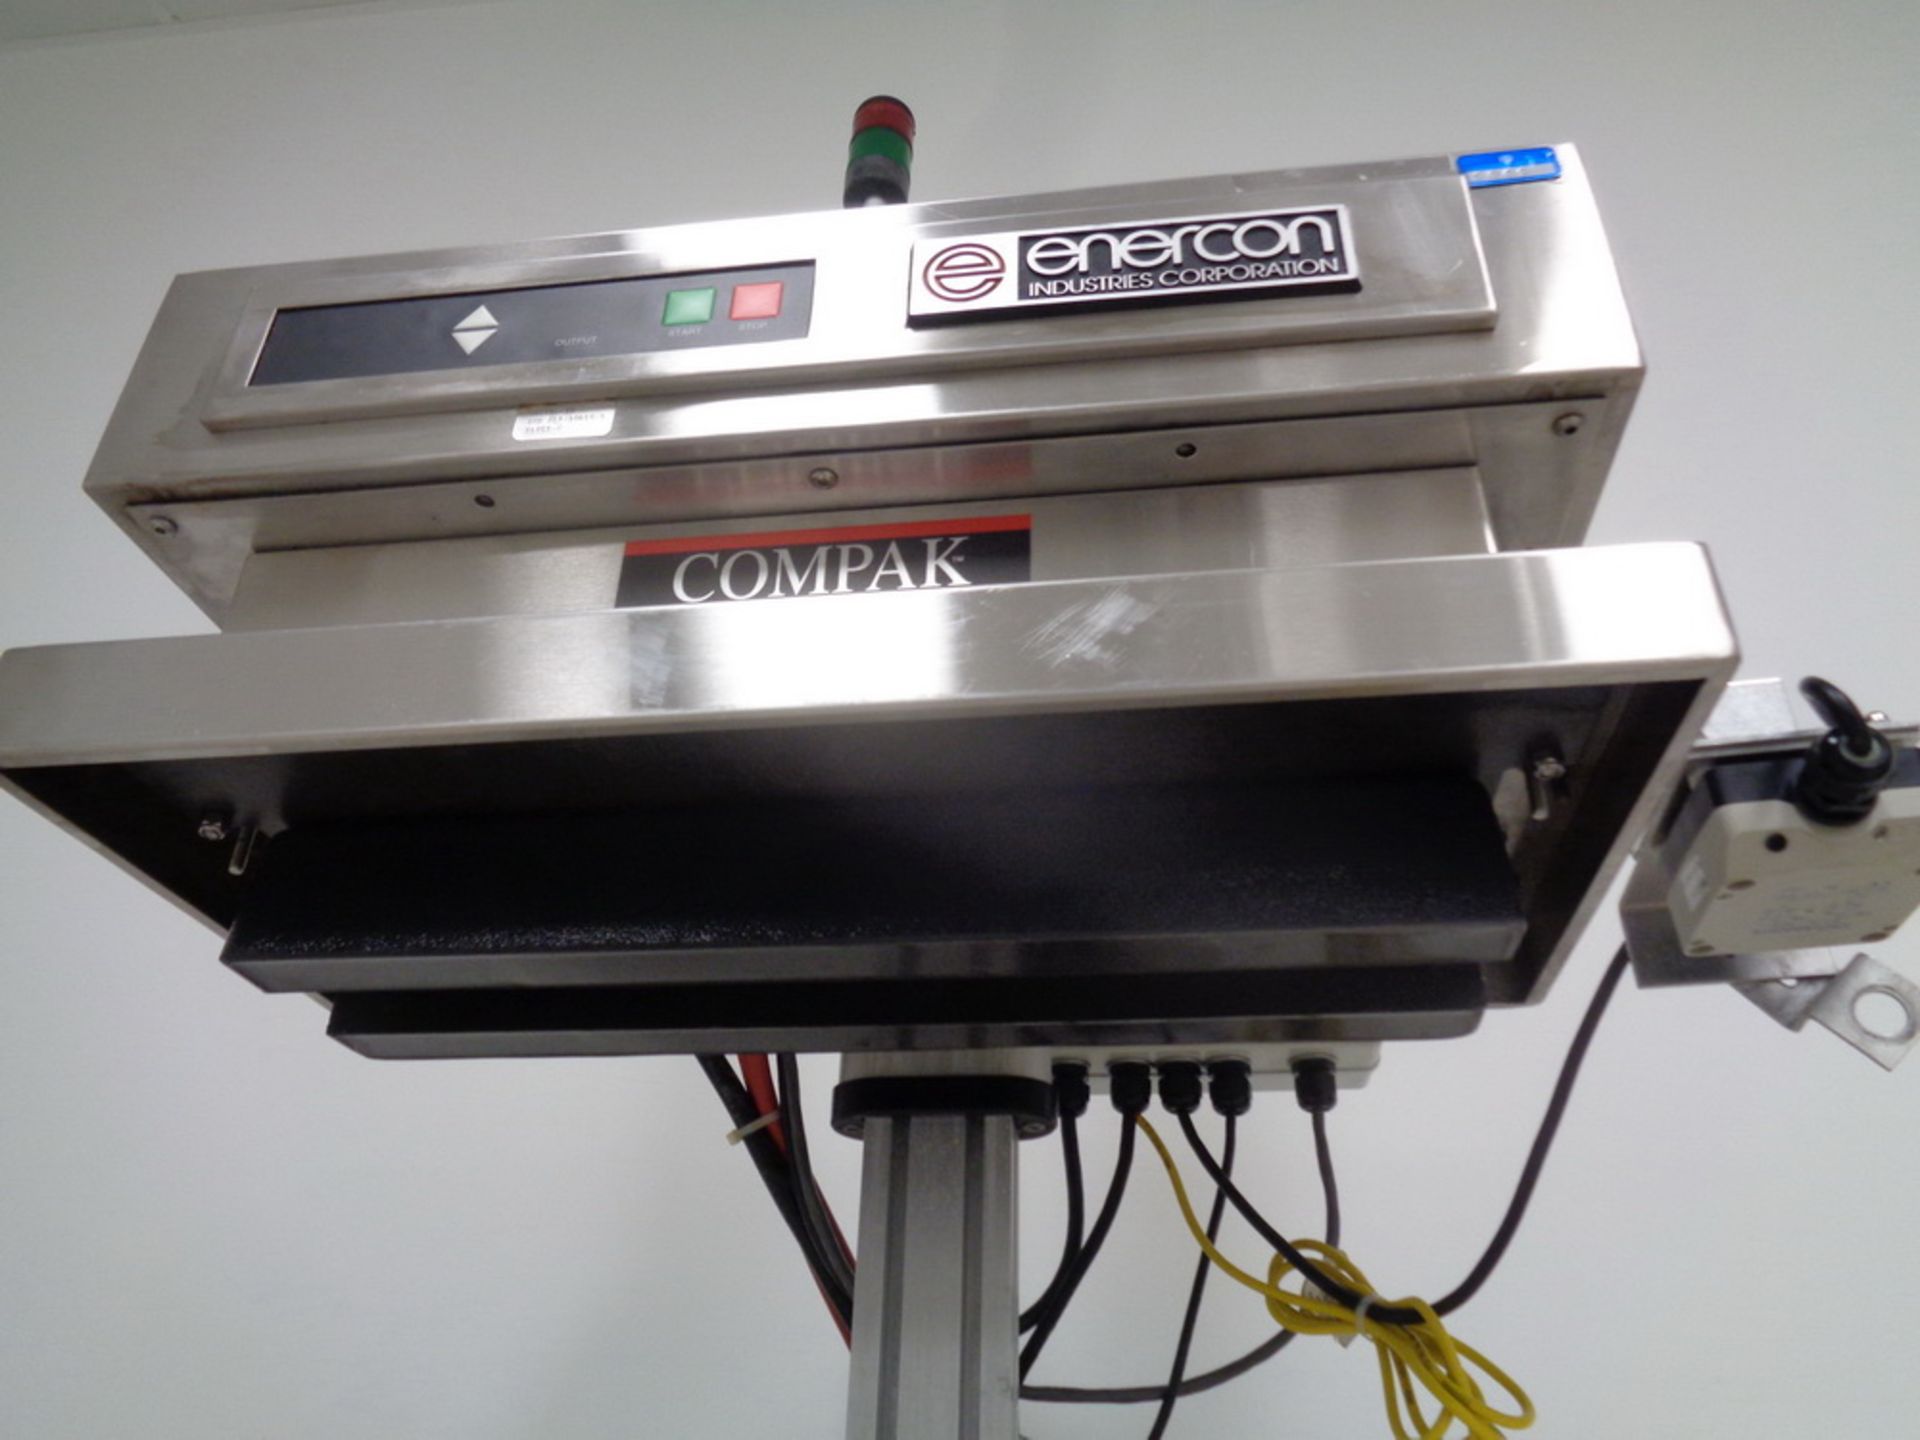 ENERCON INDUCTION CAP SEALER, MODEL LM3284-04, SERIAL NUMBER 10419-1, SEE AUCTIONEER NOTE - Image 6 of 9